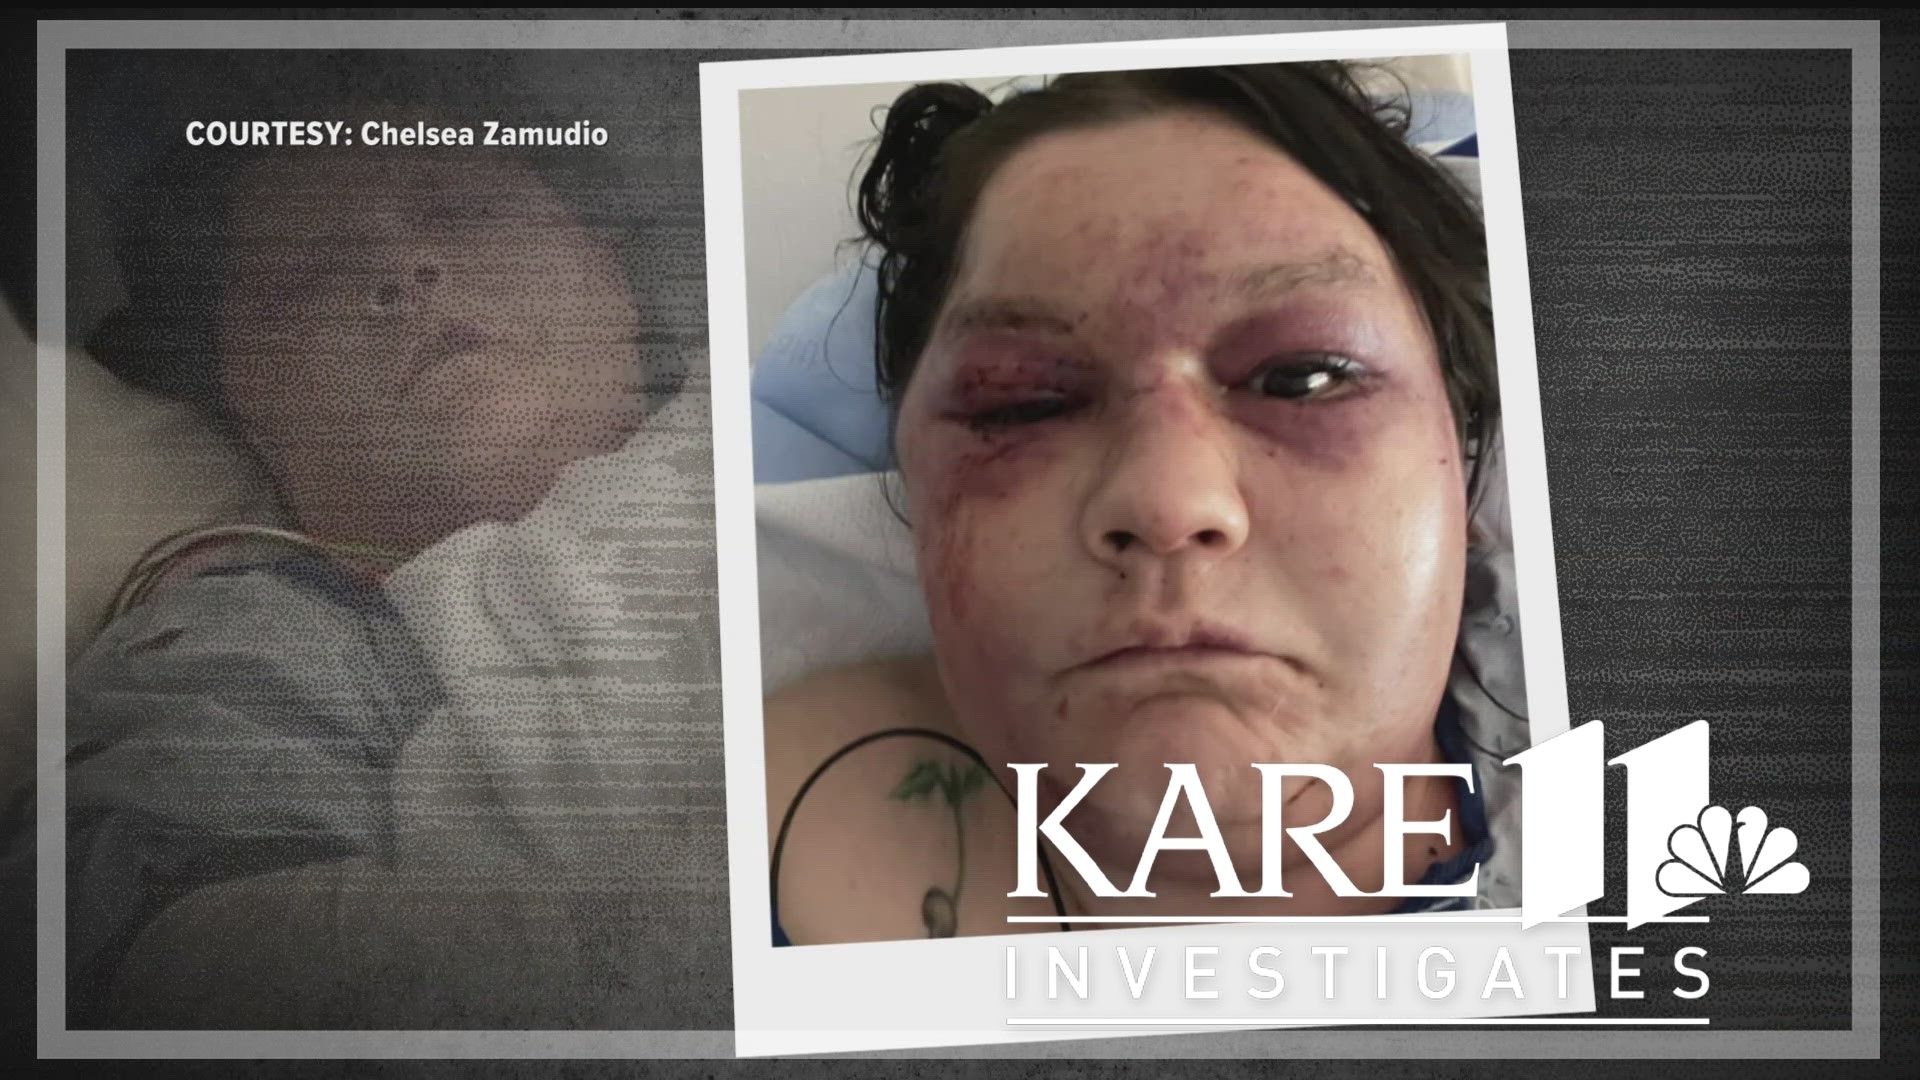 KARE 11 obtained a chilling recorded confession from a man accused of brutally beating his ex-girlfriend – just hours after pleading guilty to an earlier attack.